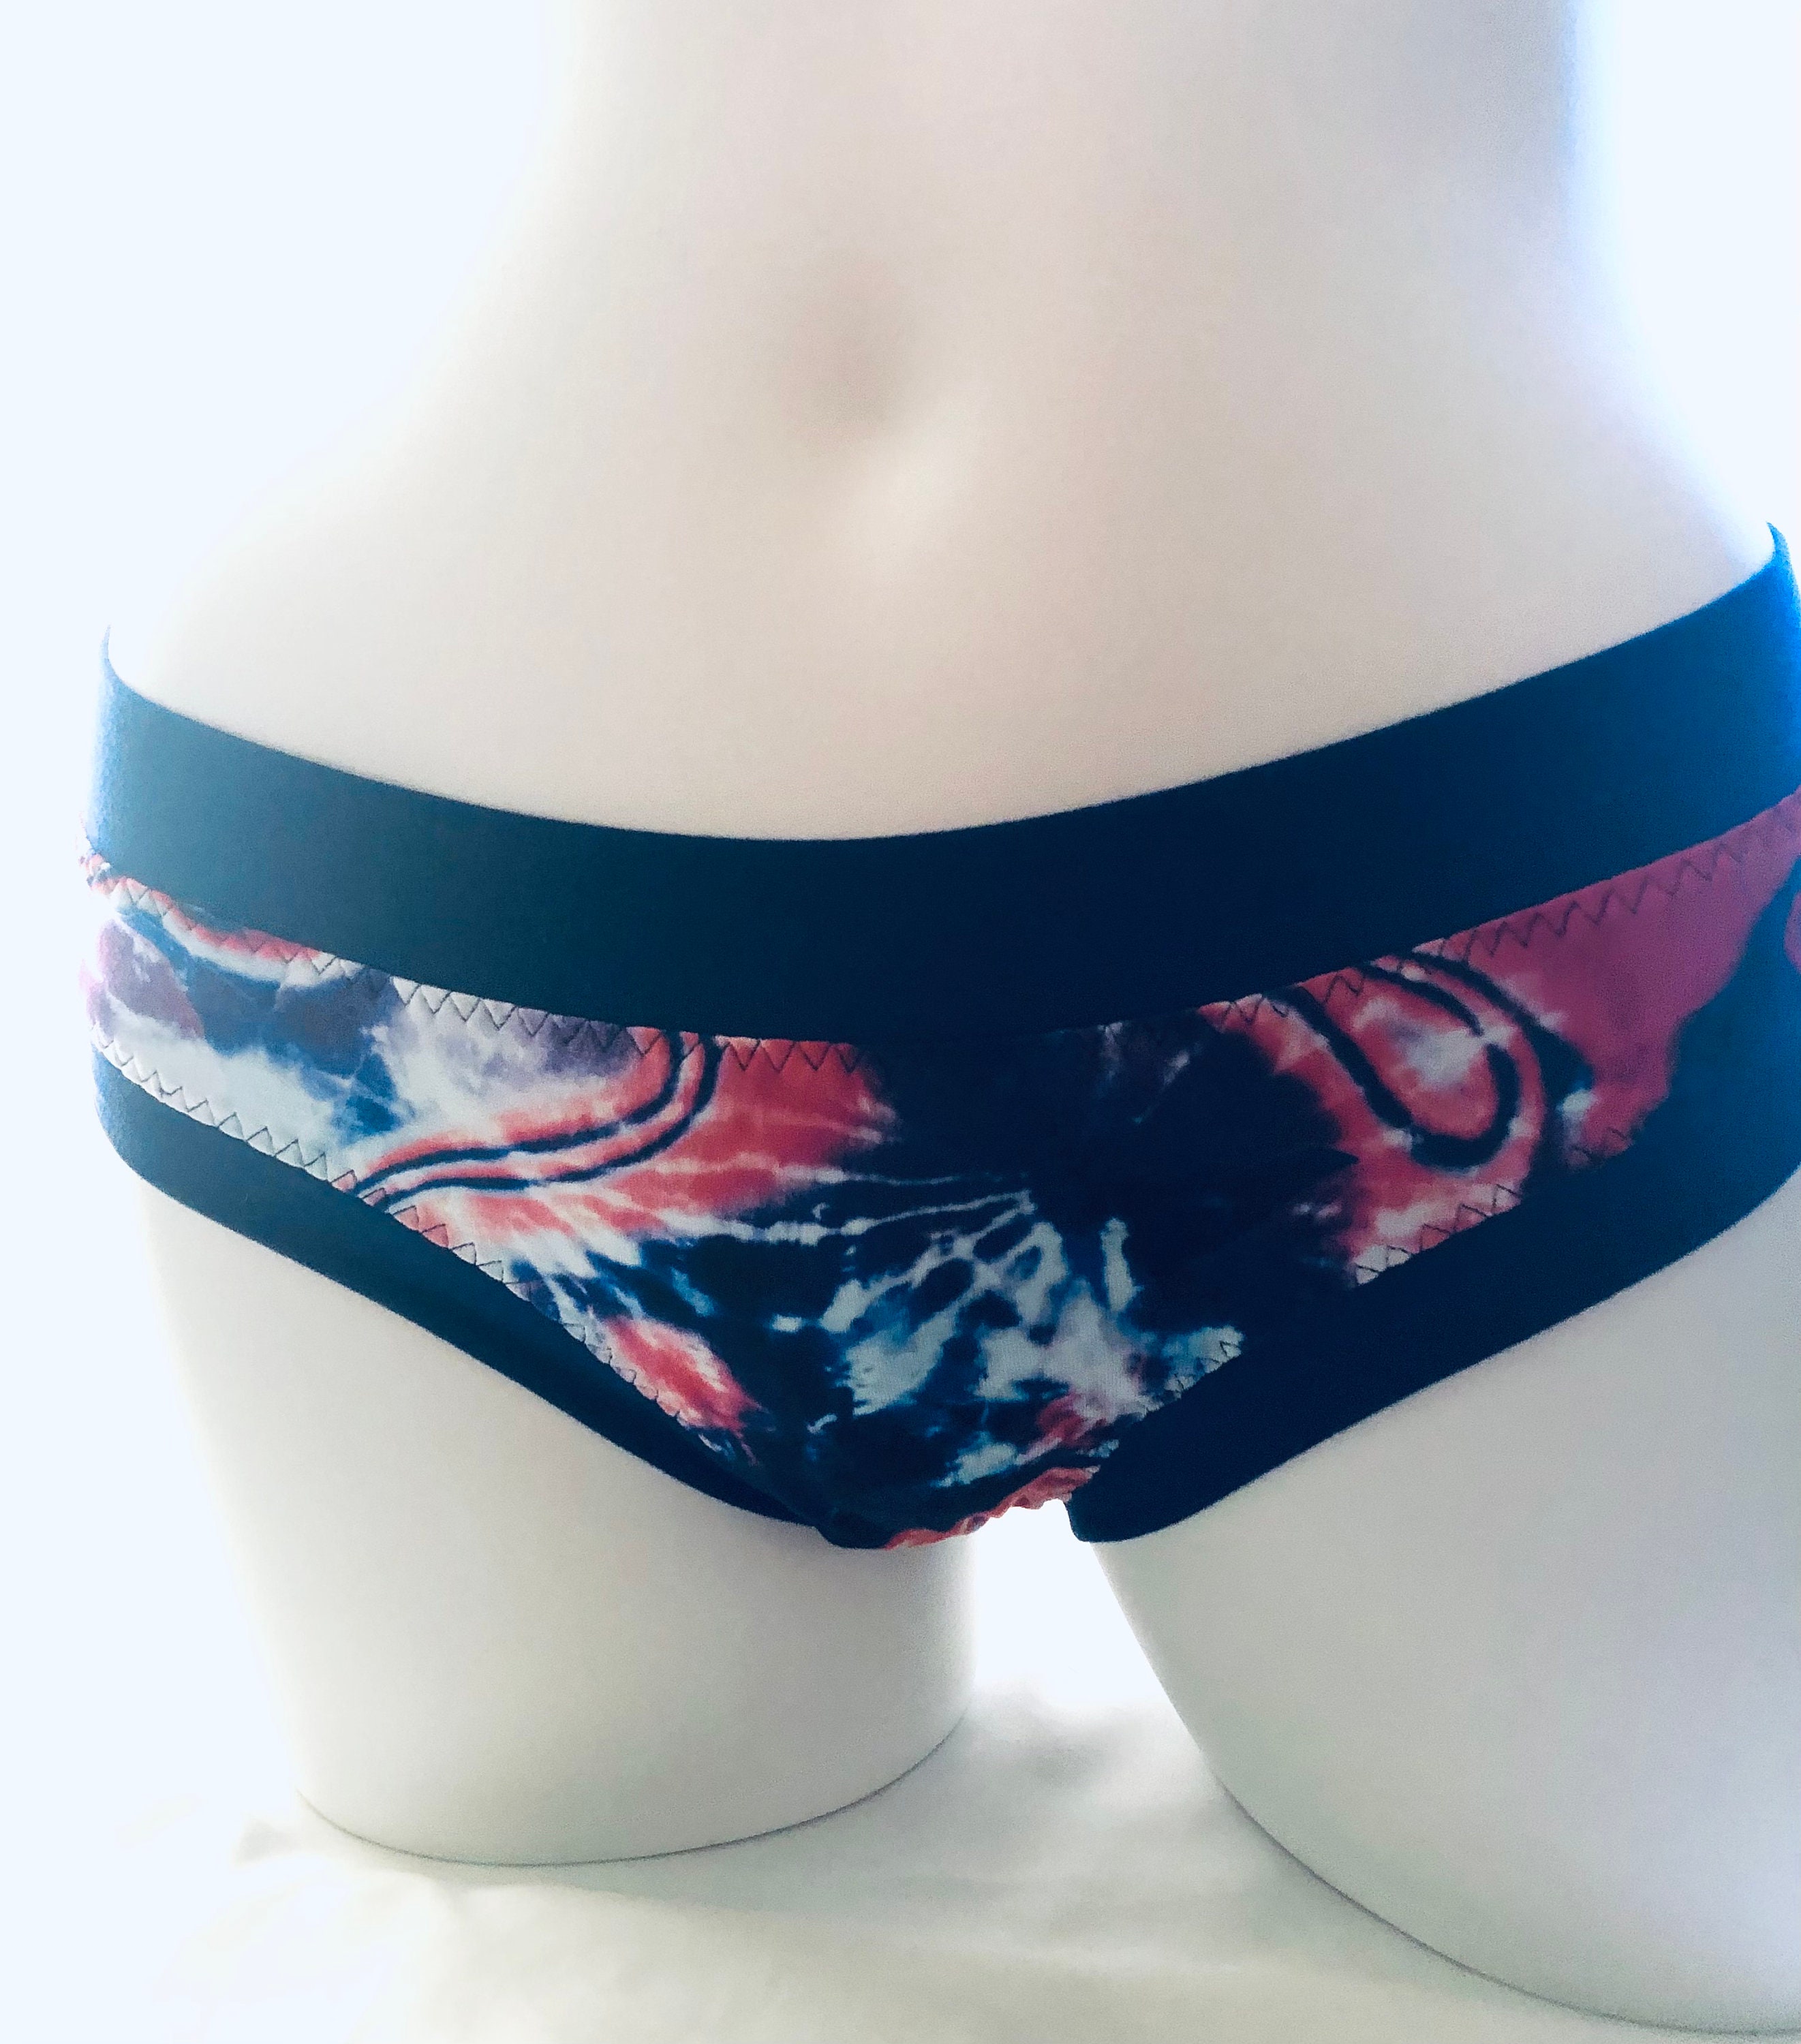 Personalized Panties Victoria's Secret Blue Patriotic Cheekster Panty With  White Stars FAST SHIPPING 4th of July Panties, Underwear 